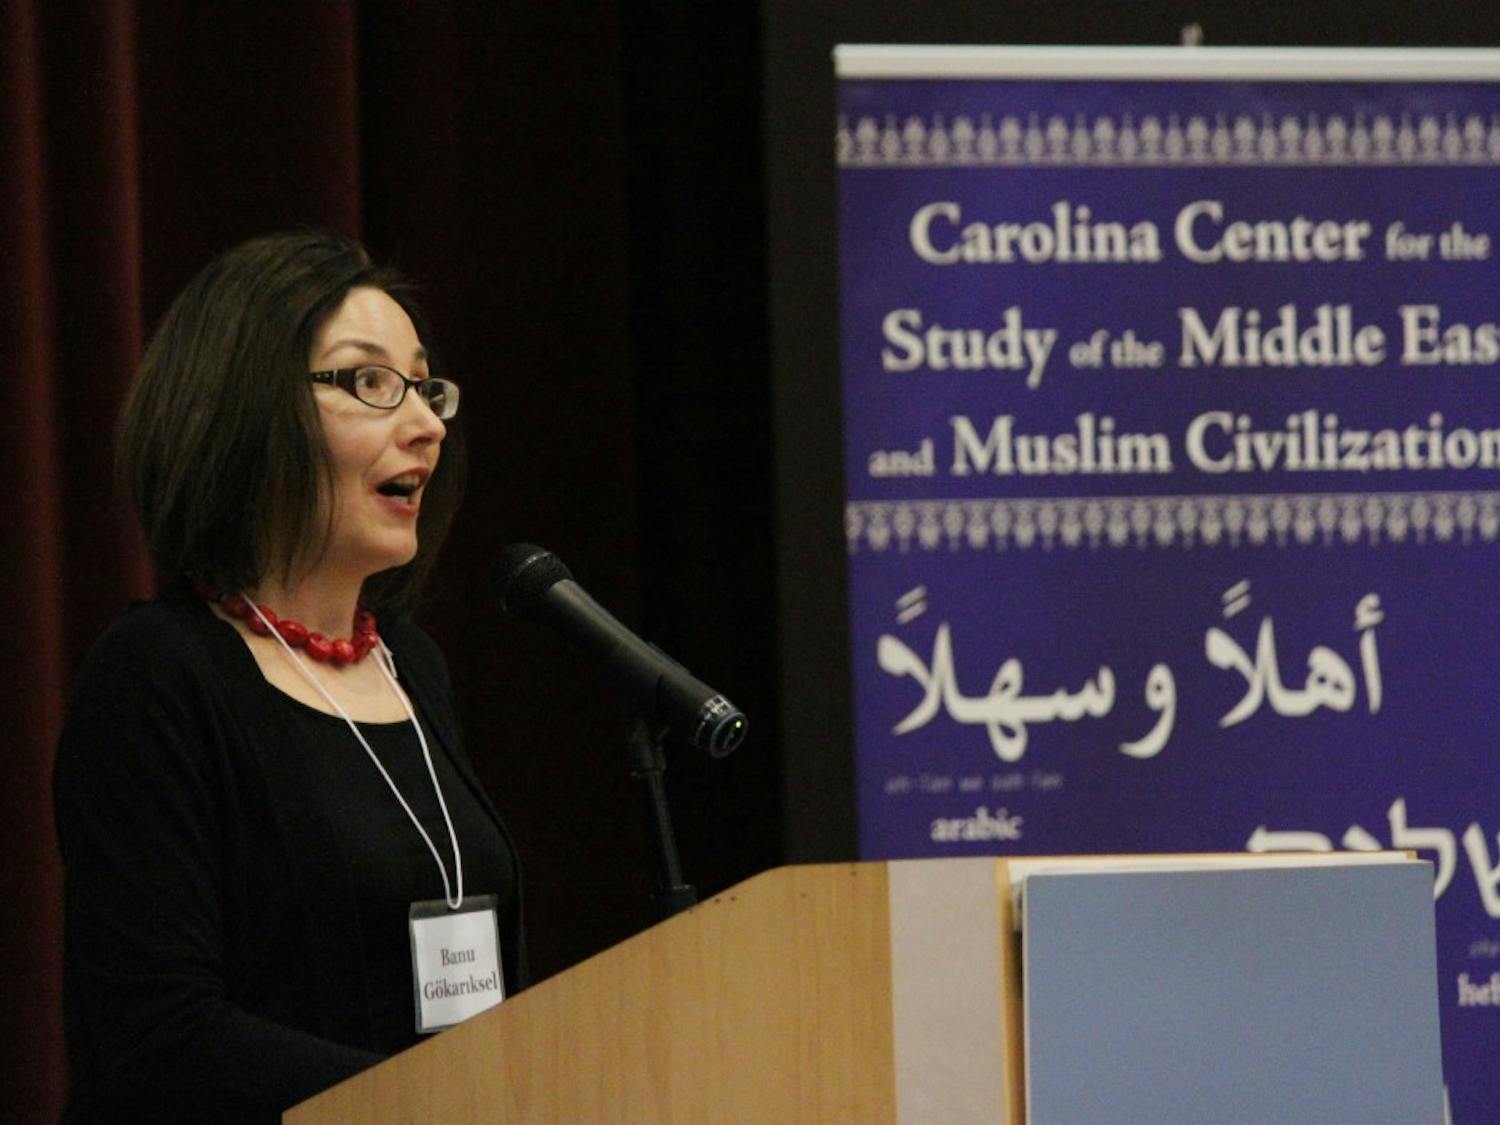 Dr. Banu Gökarıksel presents at the ReOrienting the Veil conference that took place February 22-23rd in the FedEx Global Center. 